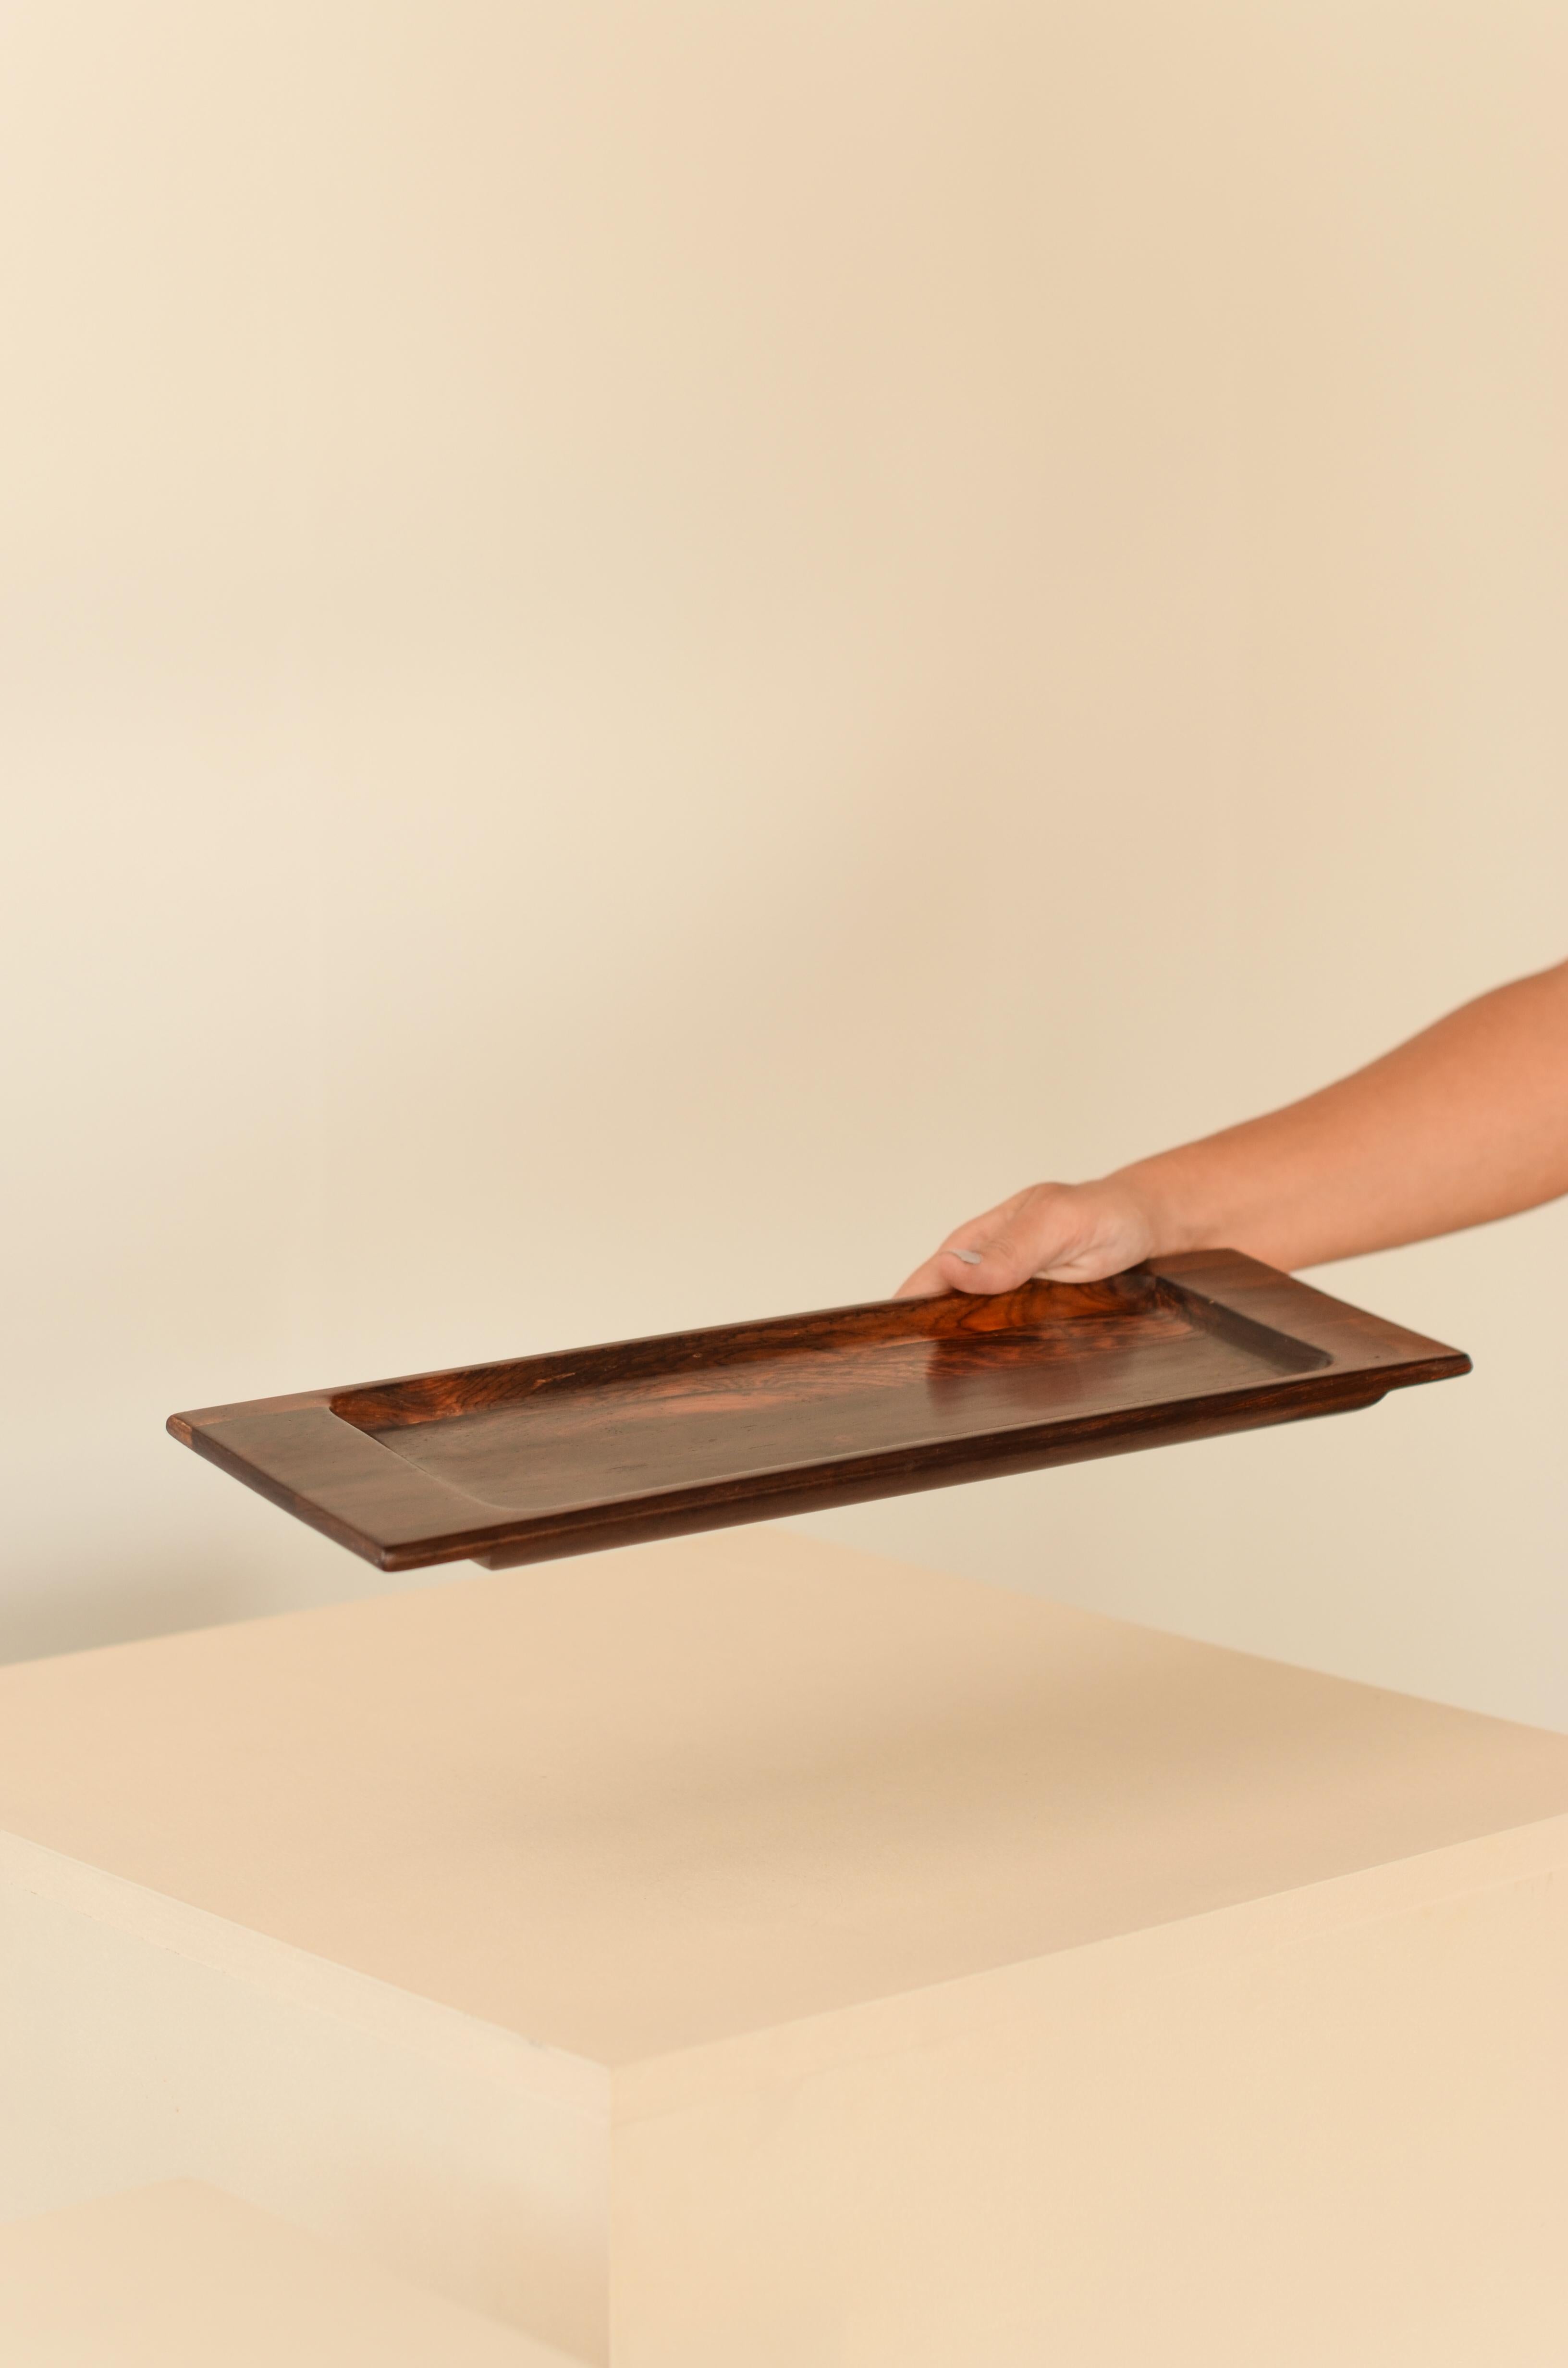 Woodwork Brazilian Midcentury Tray #701 in Rosewood by Jean Gillon for WoodArt For Sale